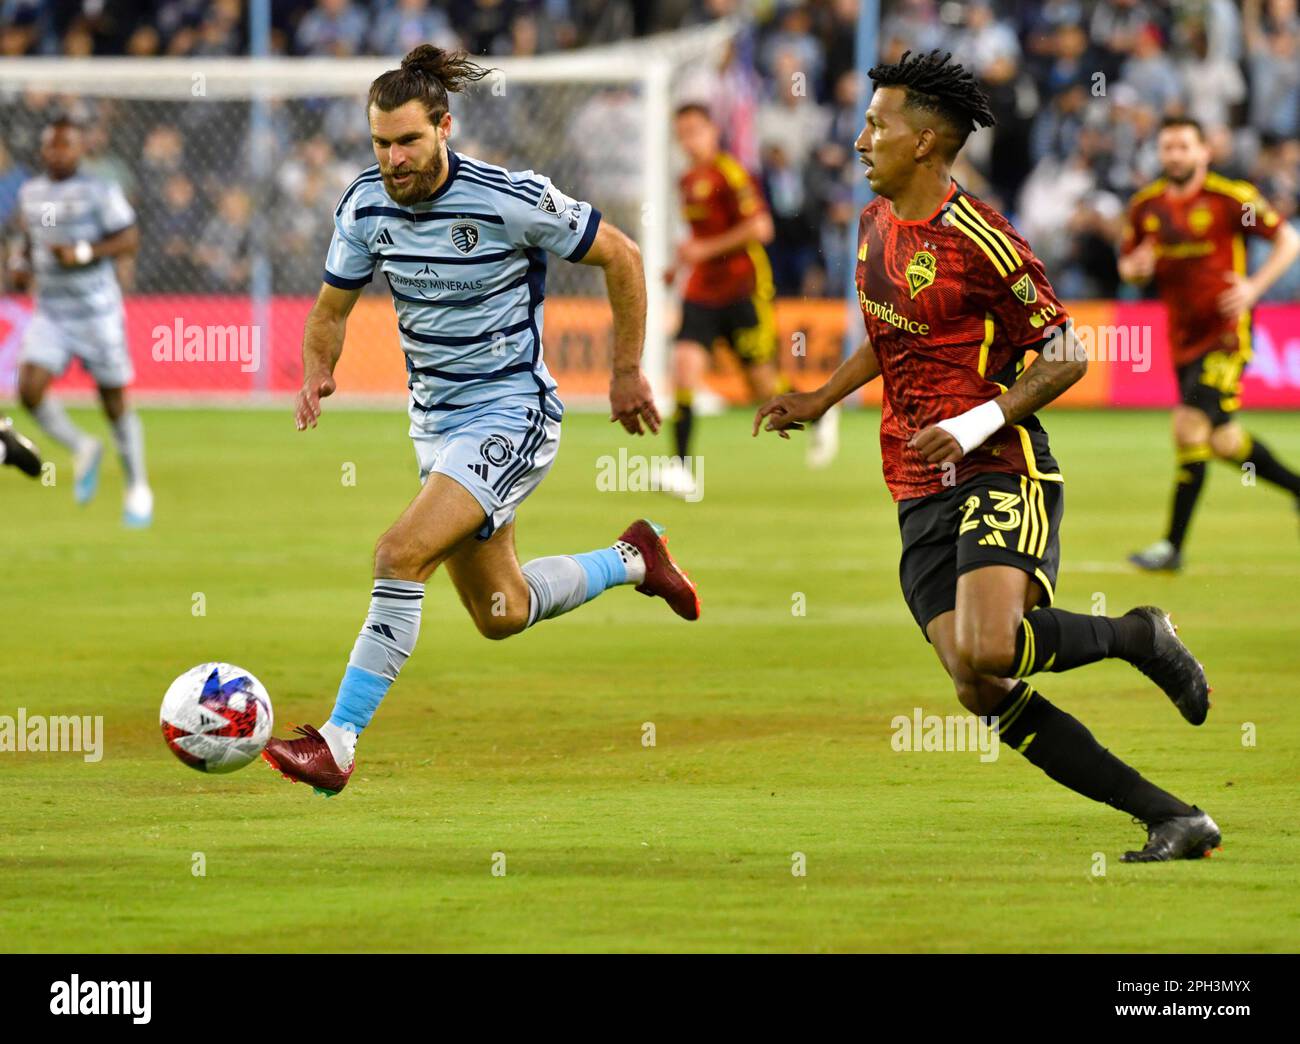 Kansas City, USA. 25th Mar, 2023. Sporting Kansas City midfielder Graham Zusi (8, left) dribbles ahead of Seattle Sounders midfielder Léo Chú (23). Sporting KC hosted the Seattle Sounders in a Major League Soccer game on March 25, 2023 at Children's Mercy Park Stadium in Kansas City, KS, USA. Seattle won 4-1 with goals by striker Jordan Morris. (Photo by Tim Vizer/Sipa USA) Credit: Sipa USA/Alamy Live News Stock Photo